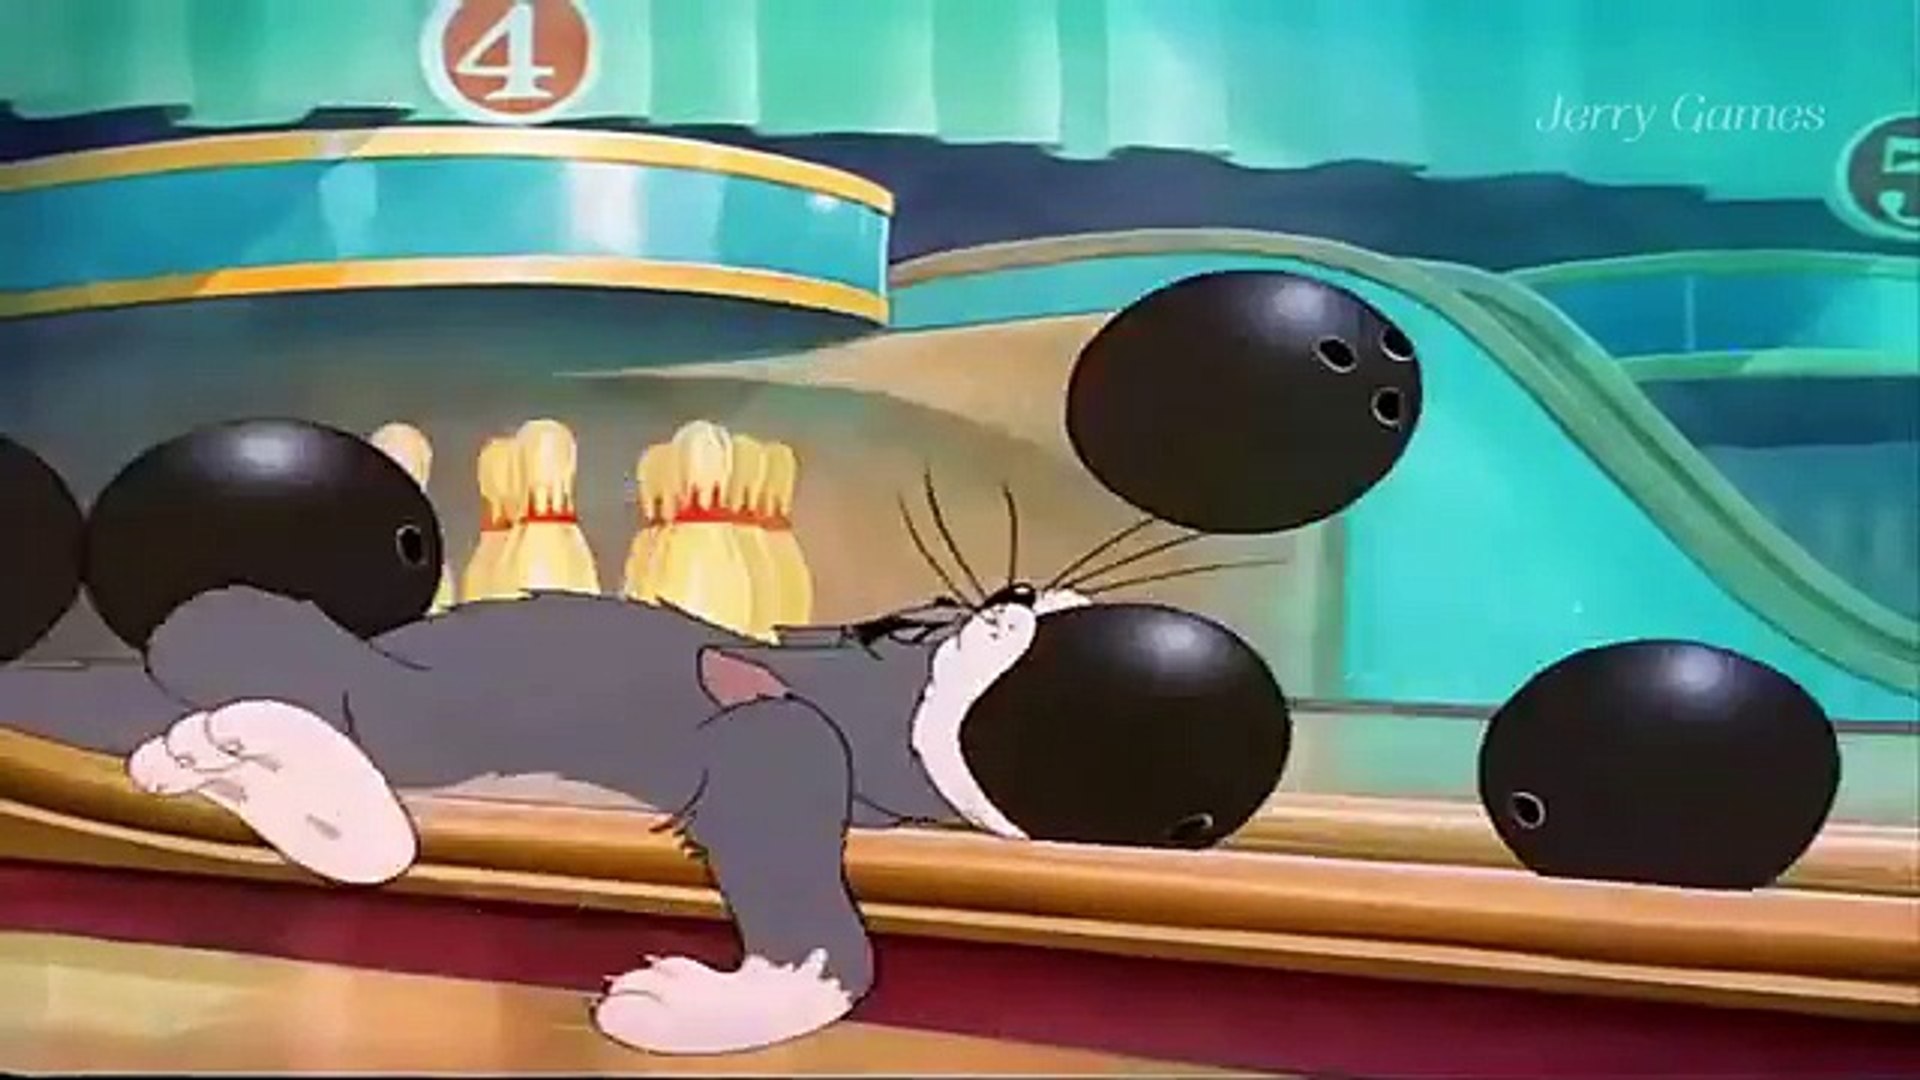 Tom and Jerry Full Episodes The Bowling Alley Cat (1942) Part 2/2 - (Jerry Games)